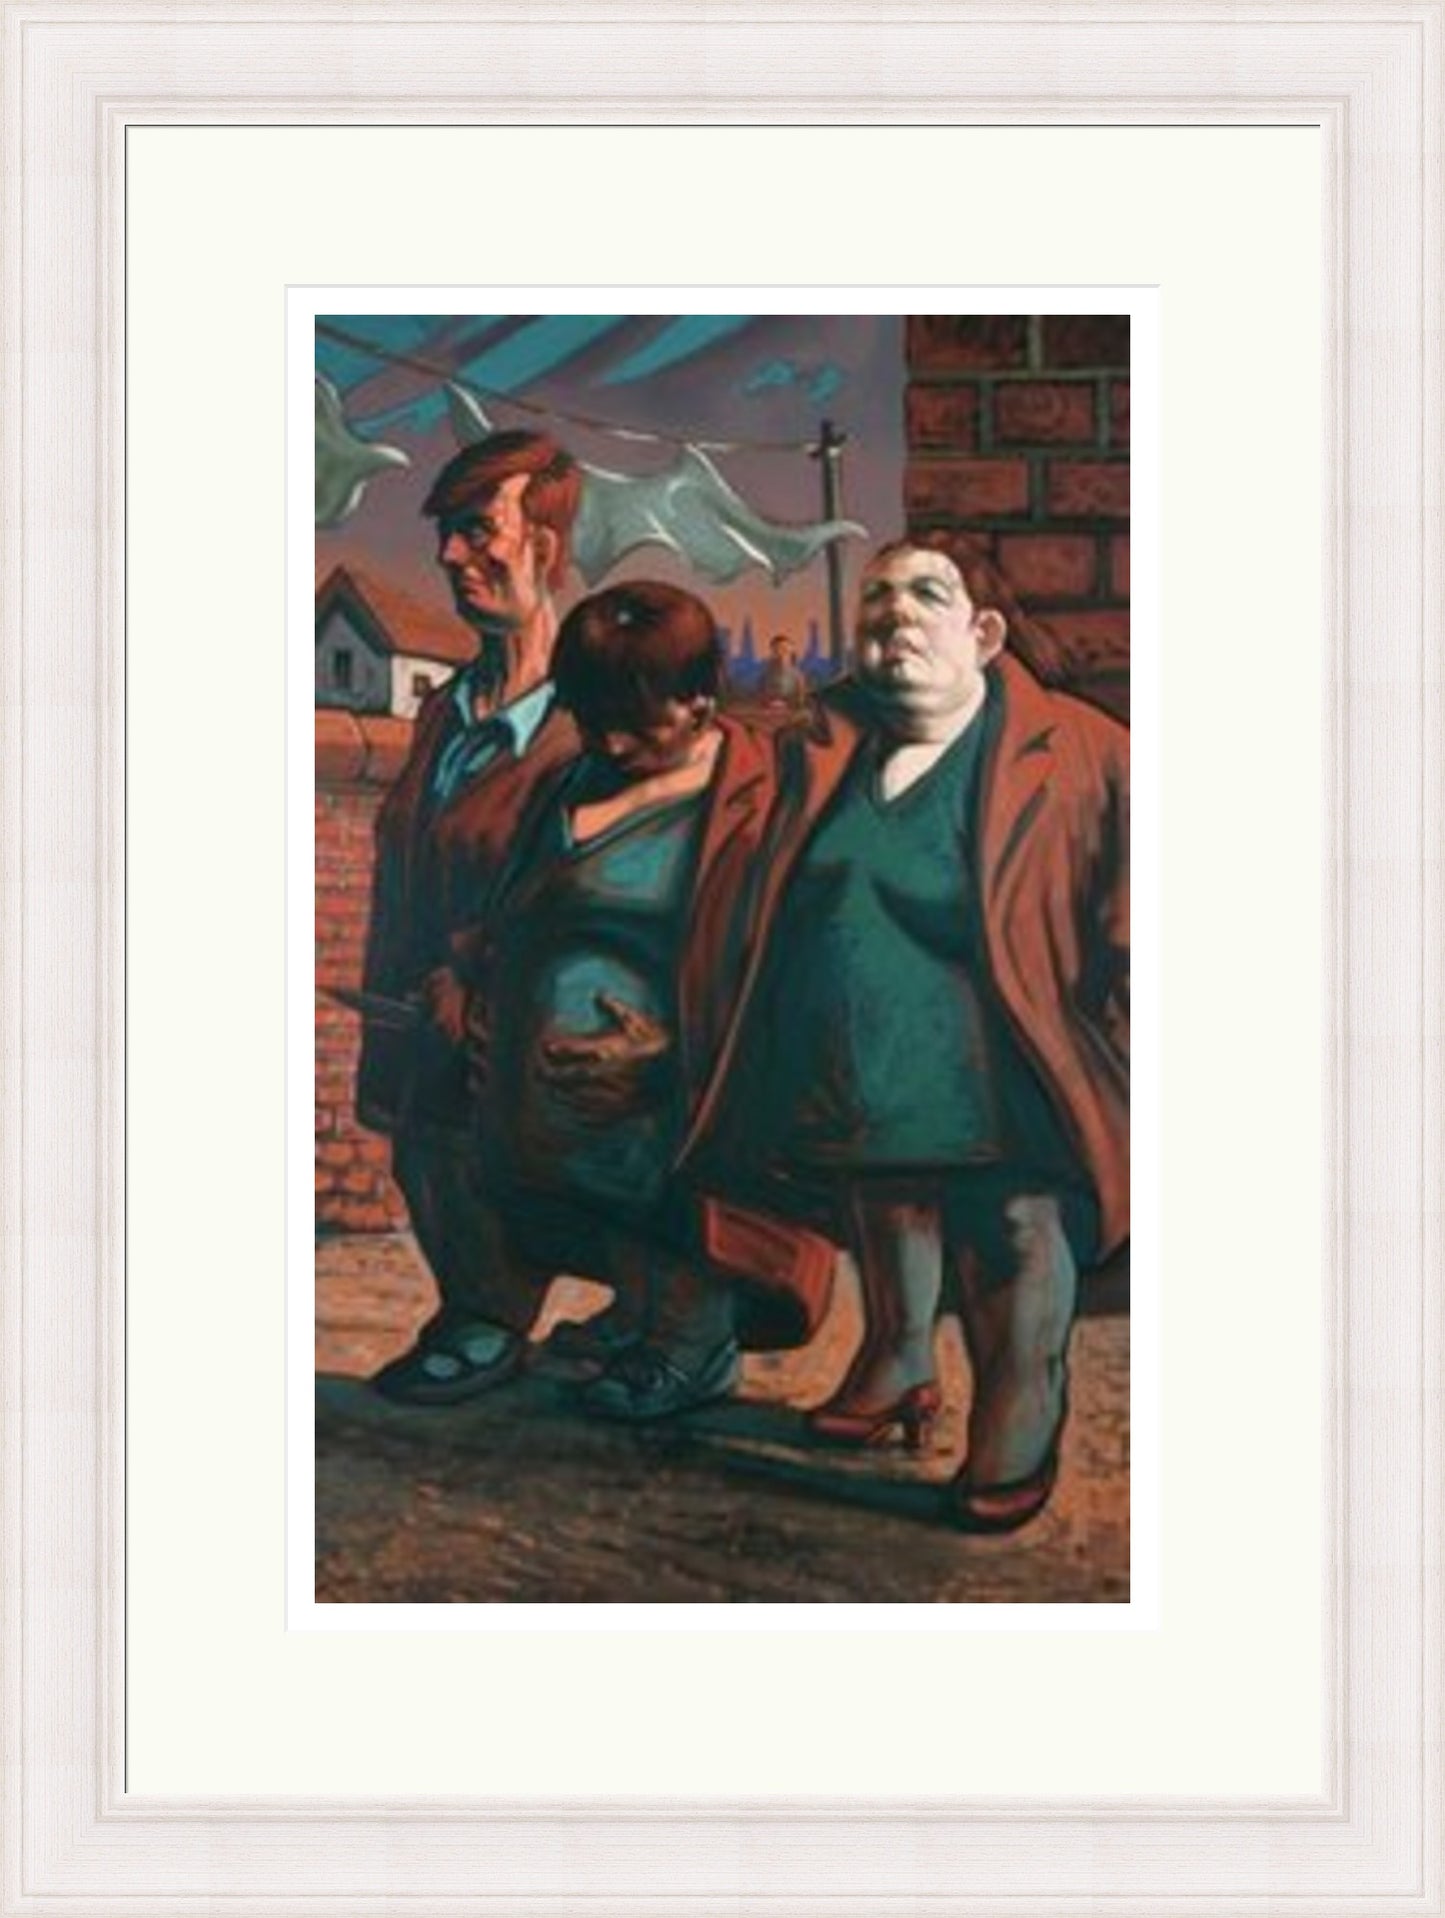 Gallowgate Girls by Peter Howson